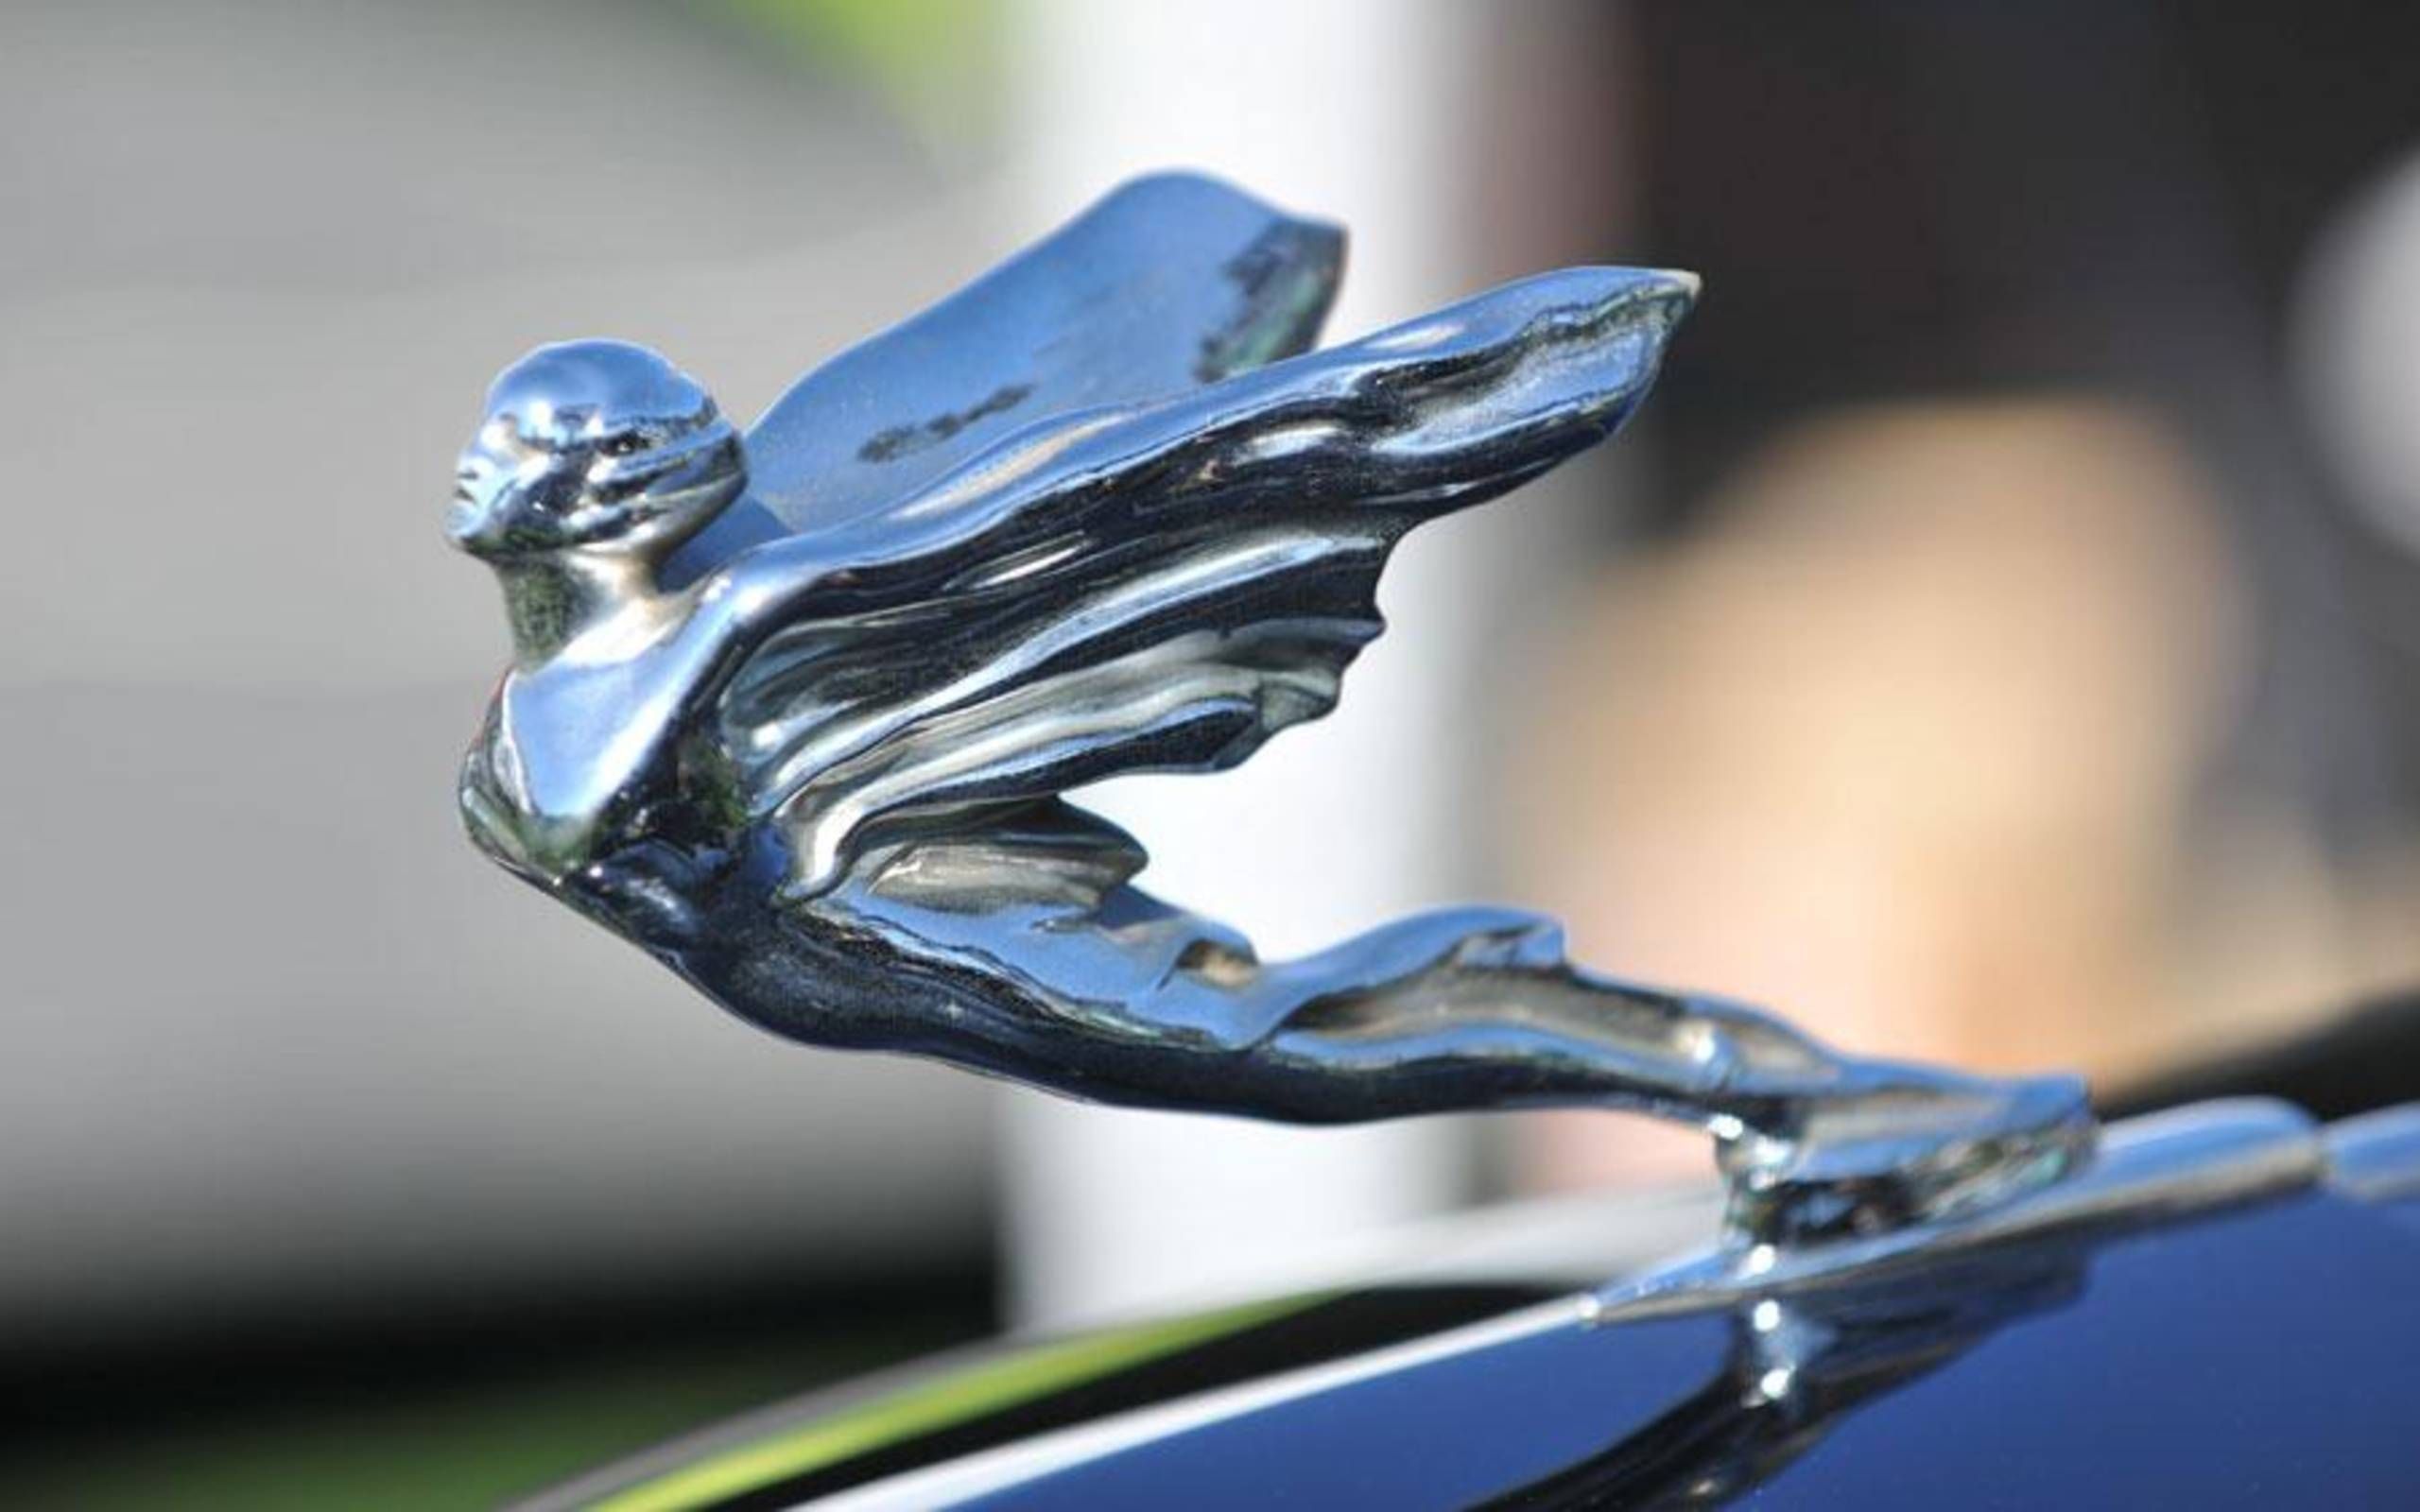 Putting focus on the ever-receding hood ornament